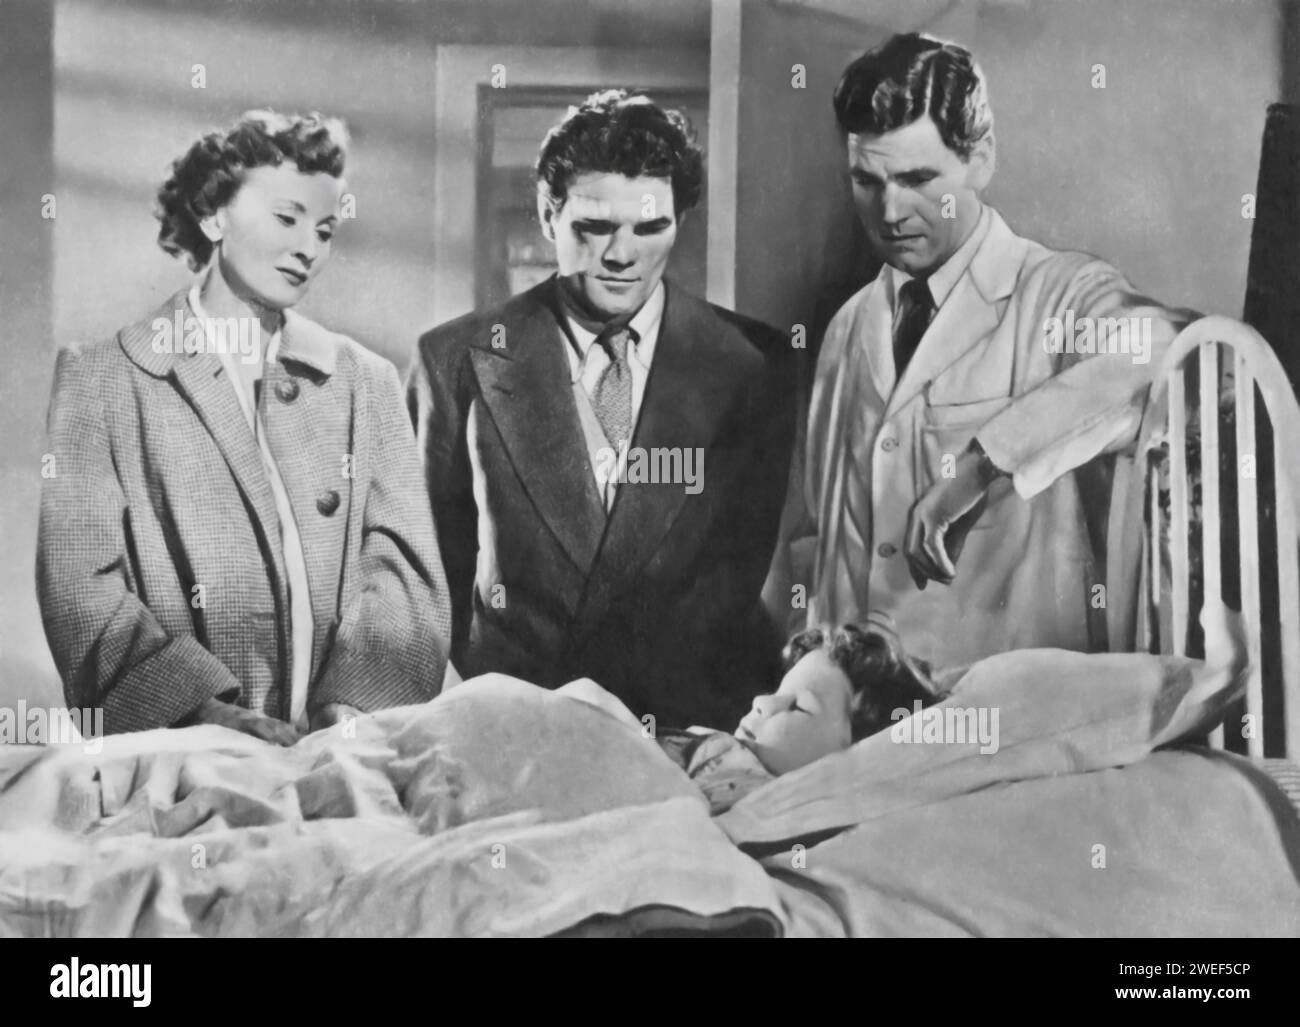 Anthony Steel, Freddie Mills, and Joy Shelton star in 'Emergency Call' (1952), a British drama film. Steel plays Dr. Graham, a dedicated physician, with Mills as Sergeant Harry Graham, and Shelton portraying Nurse Yvonne, each pivotal in the emergency services world. Stock Photo